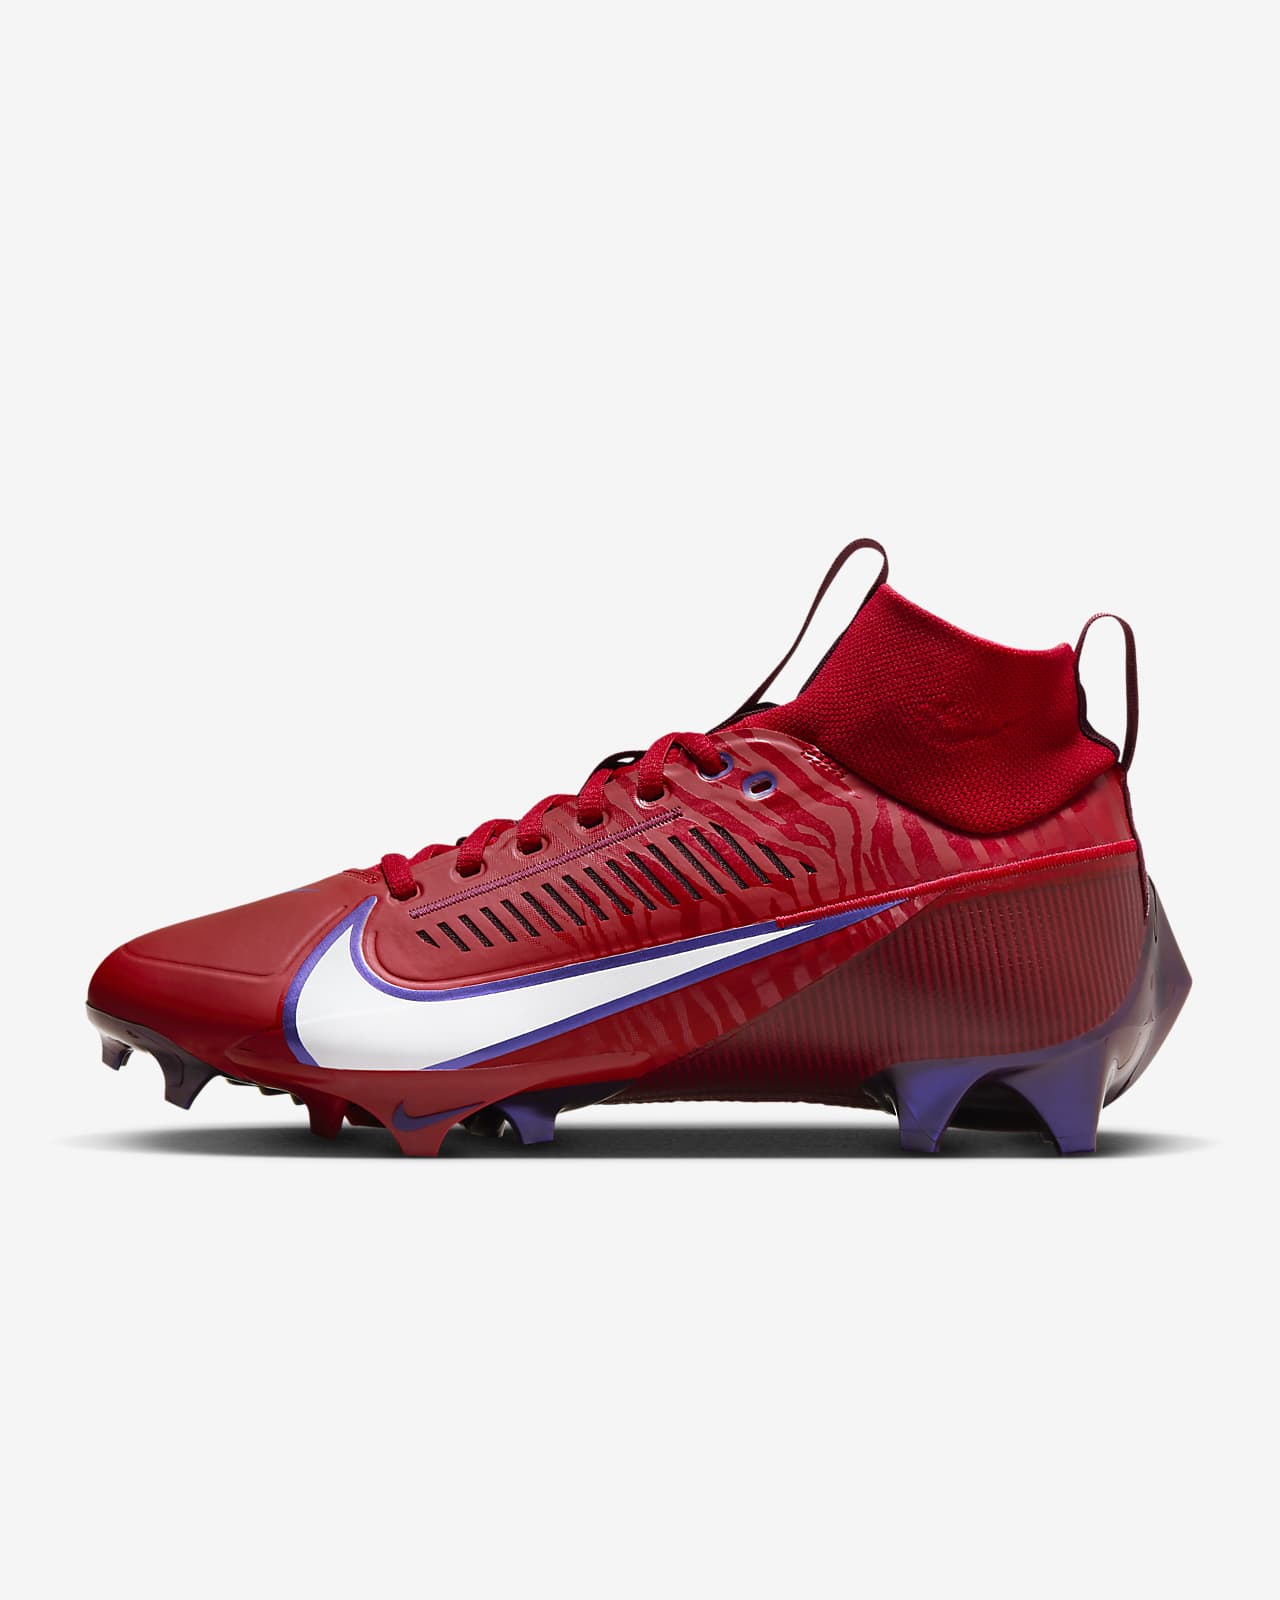 Designer Nike Youth Football Cleats 3.5Y / Red